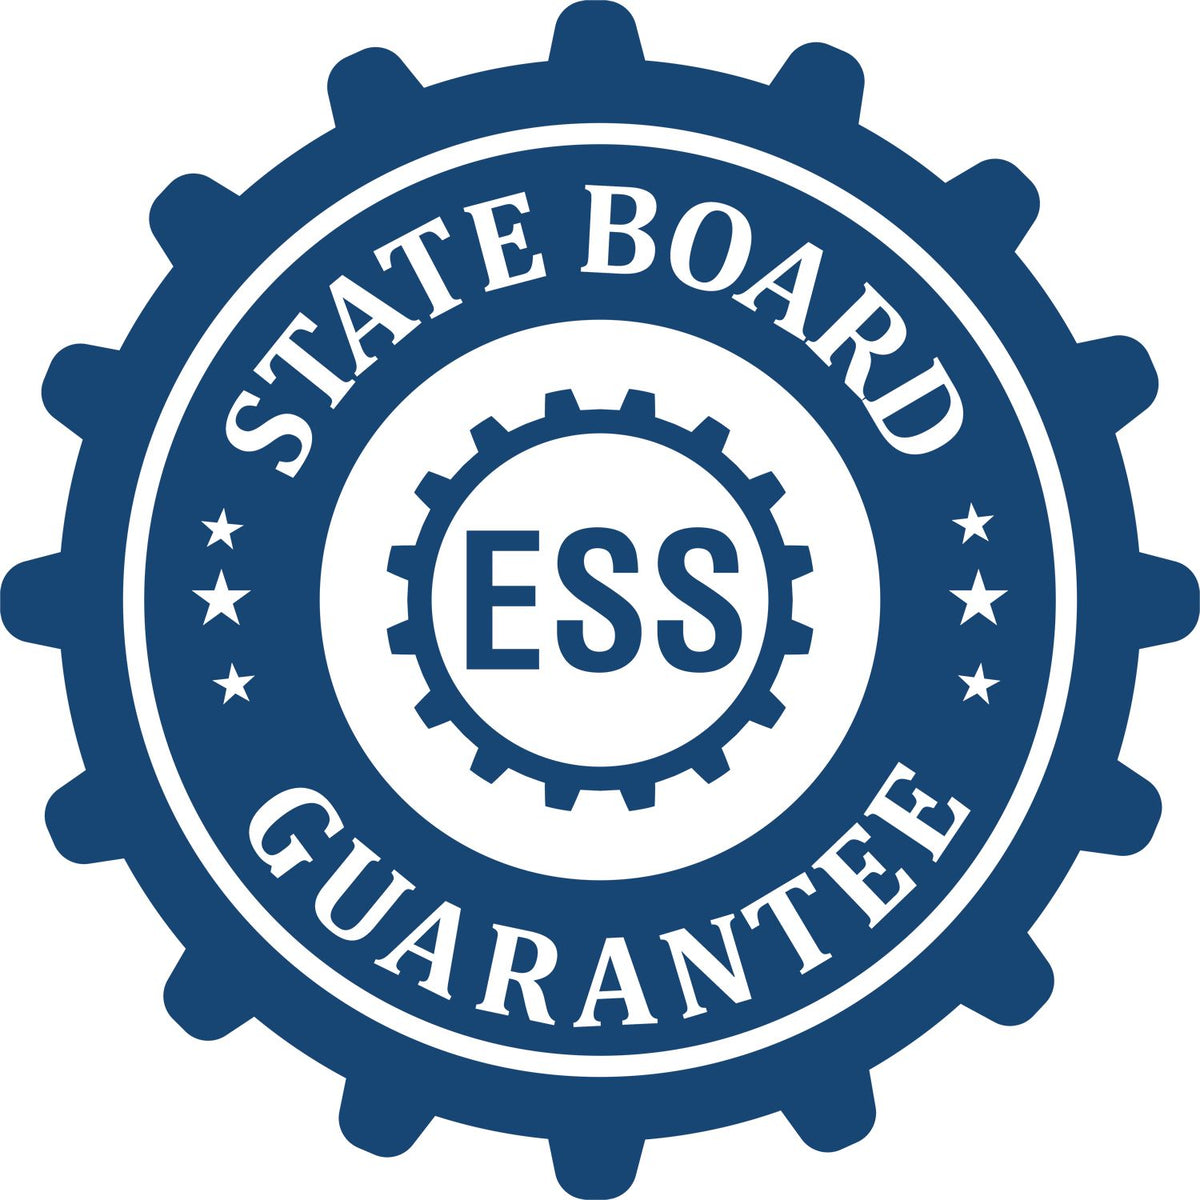 An emblem in a gear shape illustrating a state board guarantee for the Hawaii Geologist Desk Seal